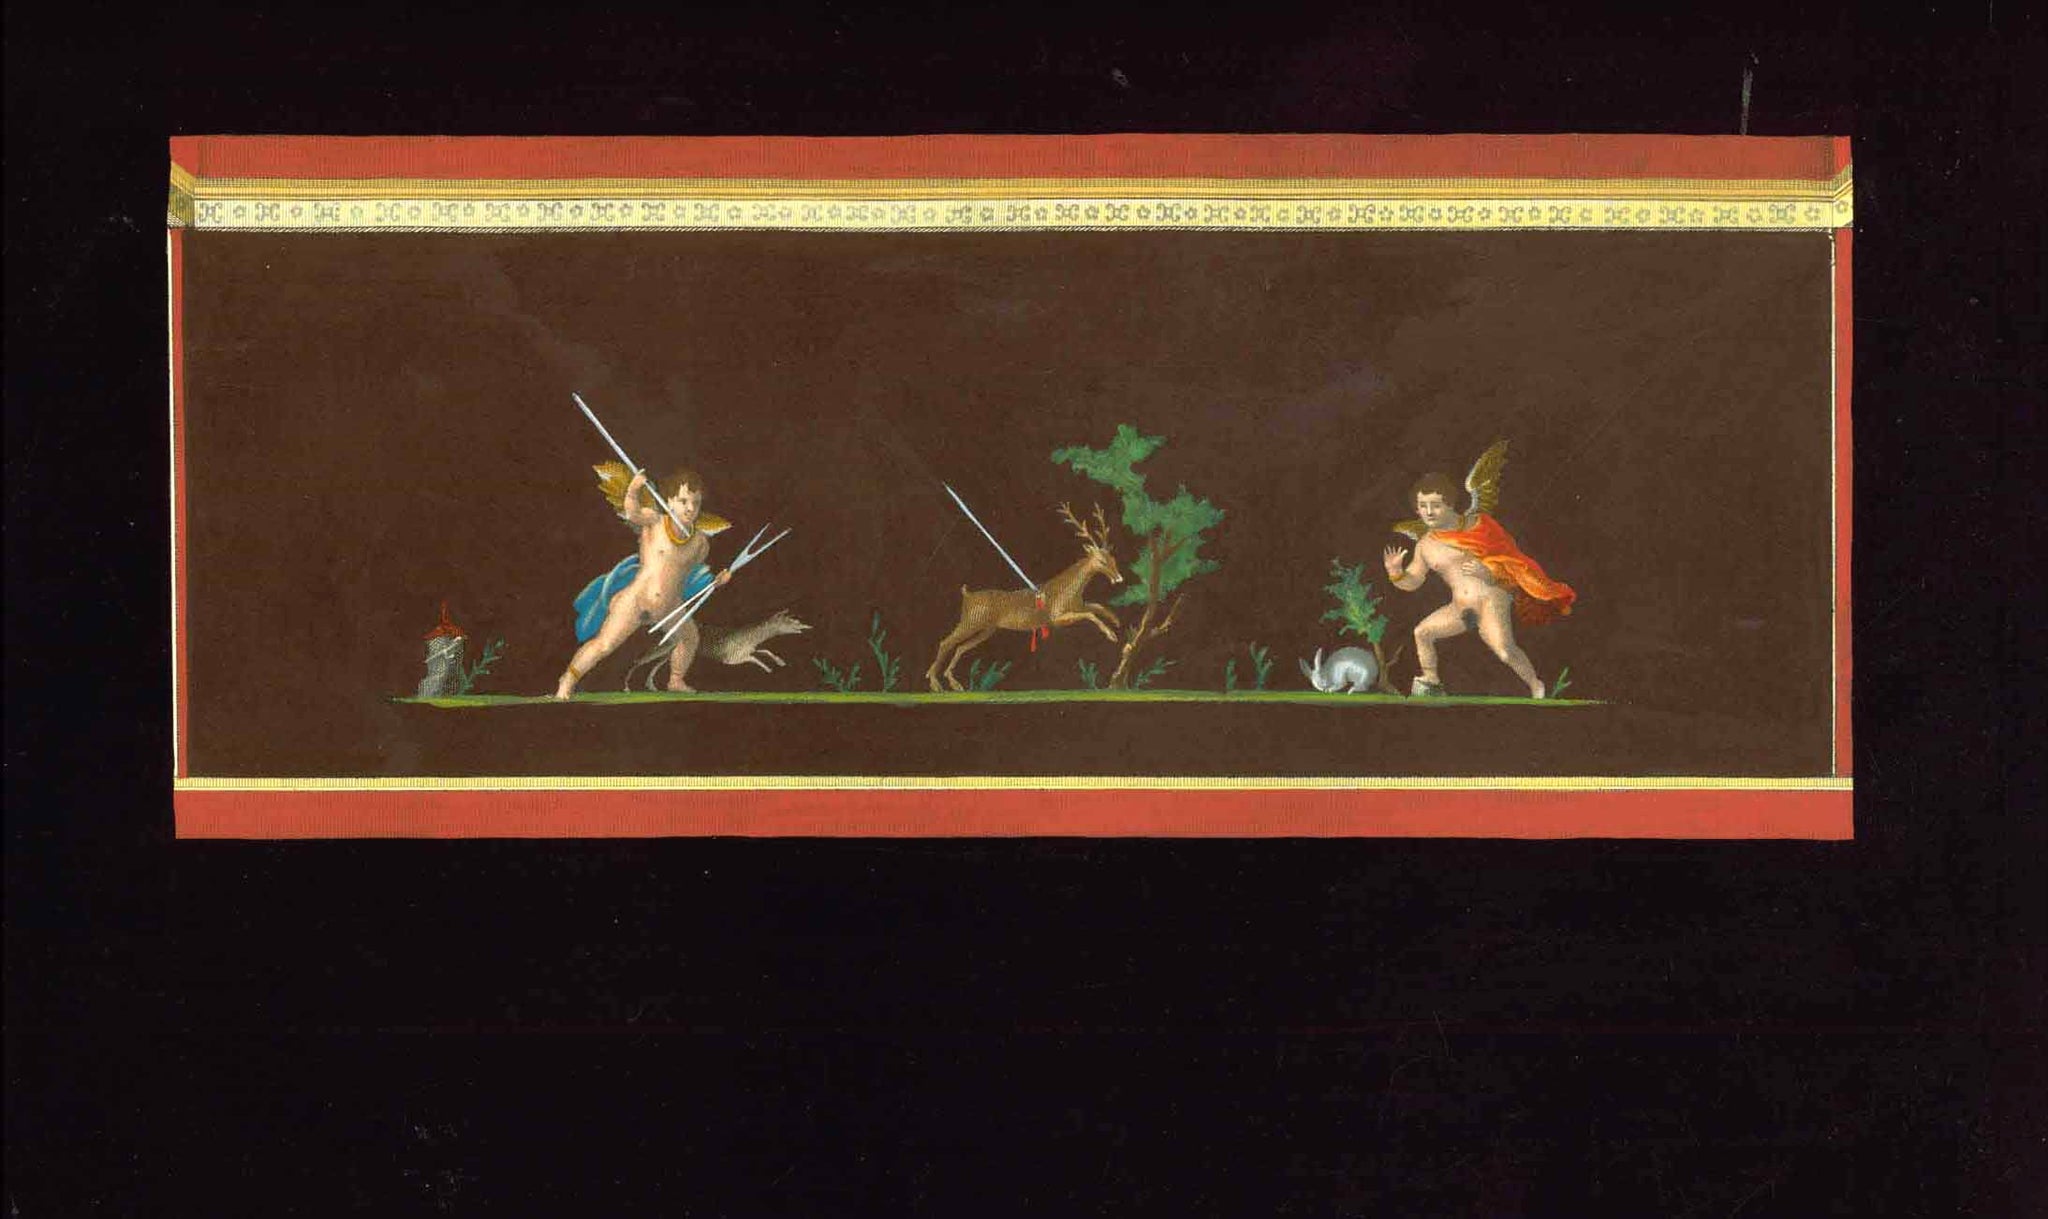 No title. One winged putto hunting deer, the other catching rabbit.  Wall fresco found during excavations in Herculaneum ca. 1750  Hand-colored copper etching. Surround by velvety black gouache-style  Published in "Antichita di Ercolano Esposte"  8 volumes of copper etchings  Naples, 1757-1792